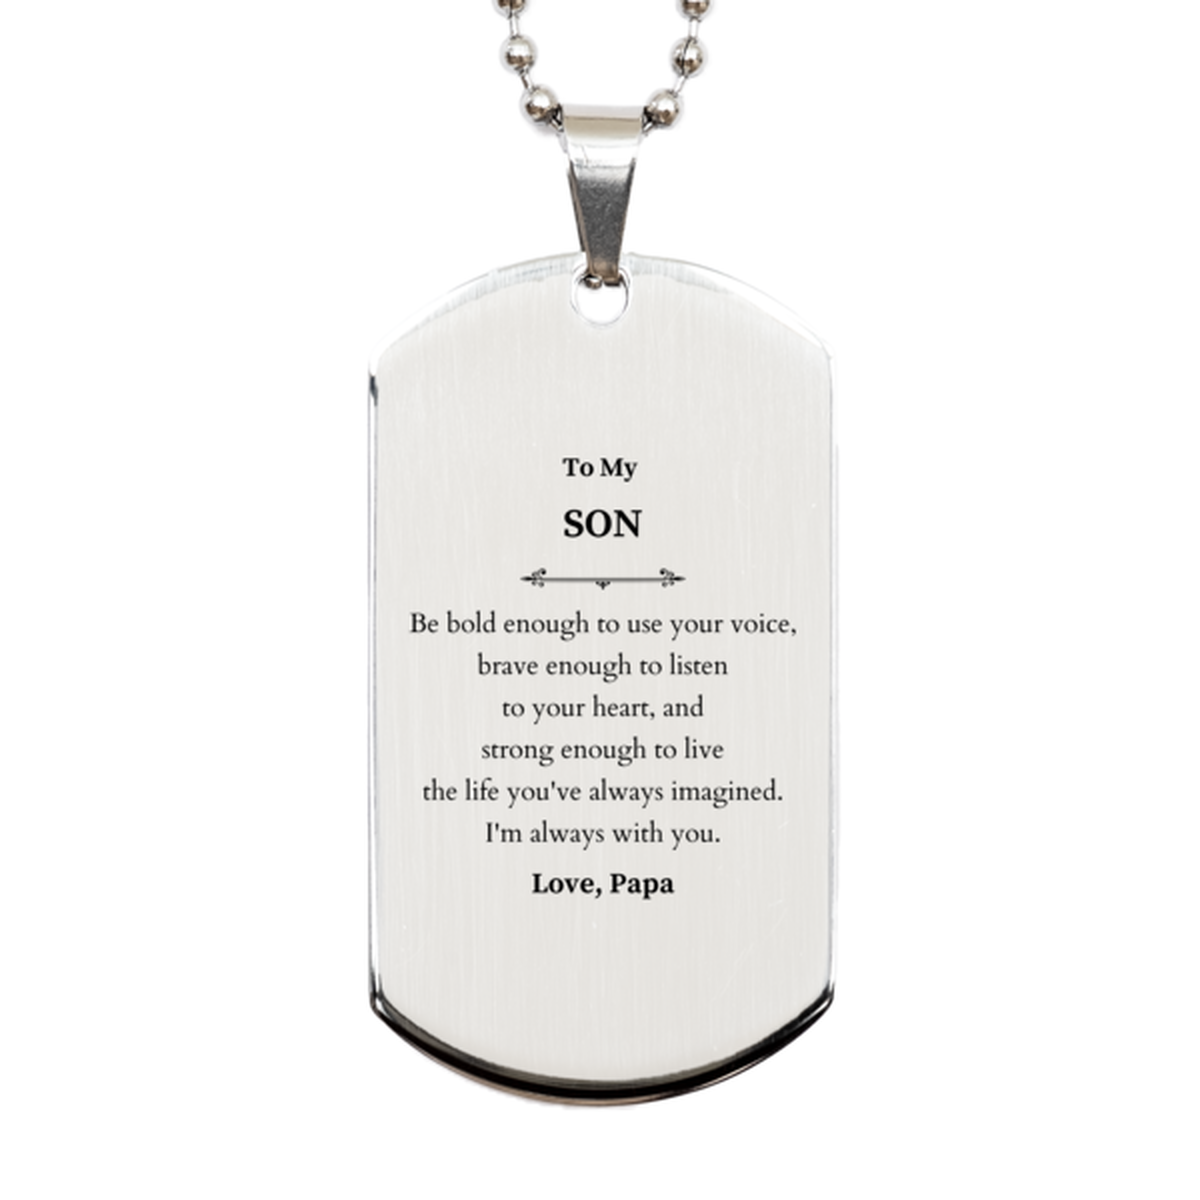 Keepsake Son Silver Dog Tag Gift Idea Graduation Christmas Birthday Son from Papa, Son Be bold enough to use your voice, brave enough to listen to your heart. Love, Papa